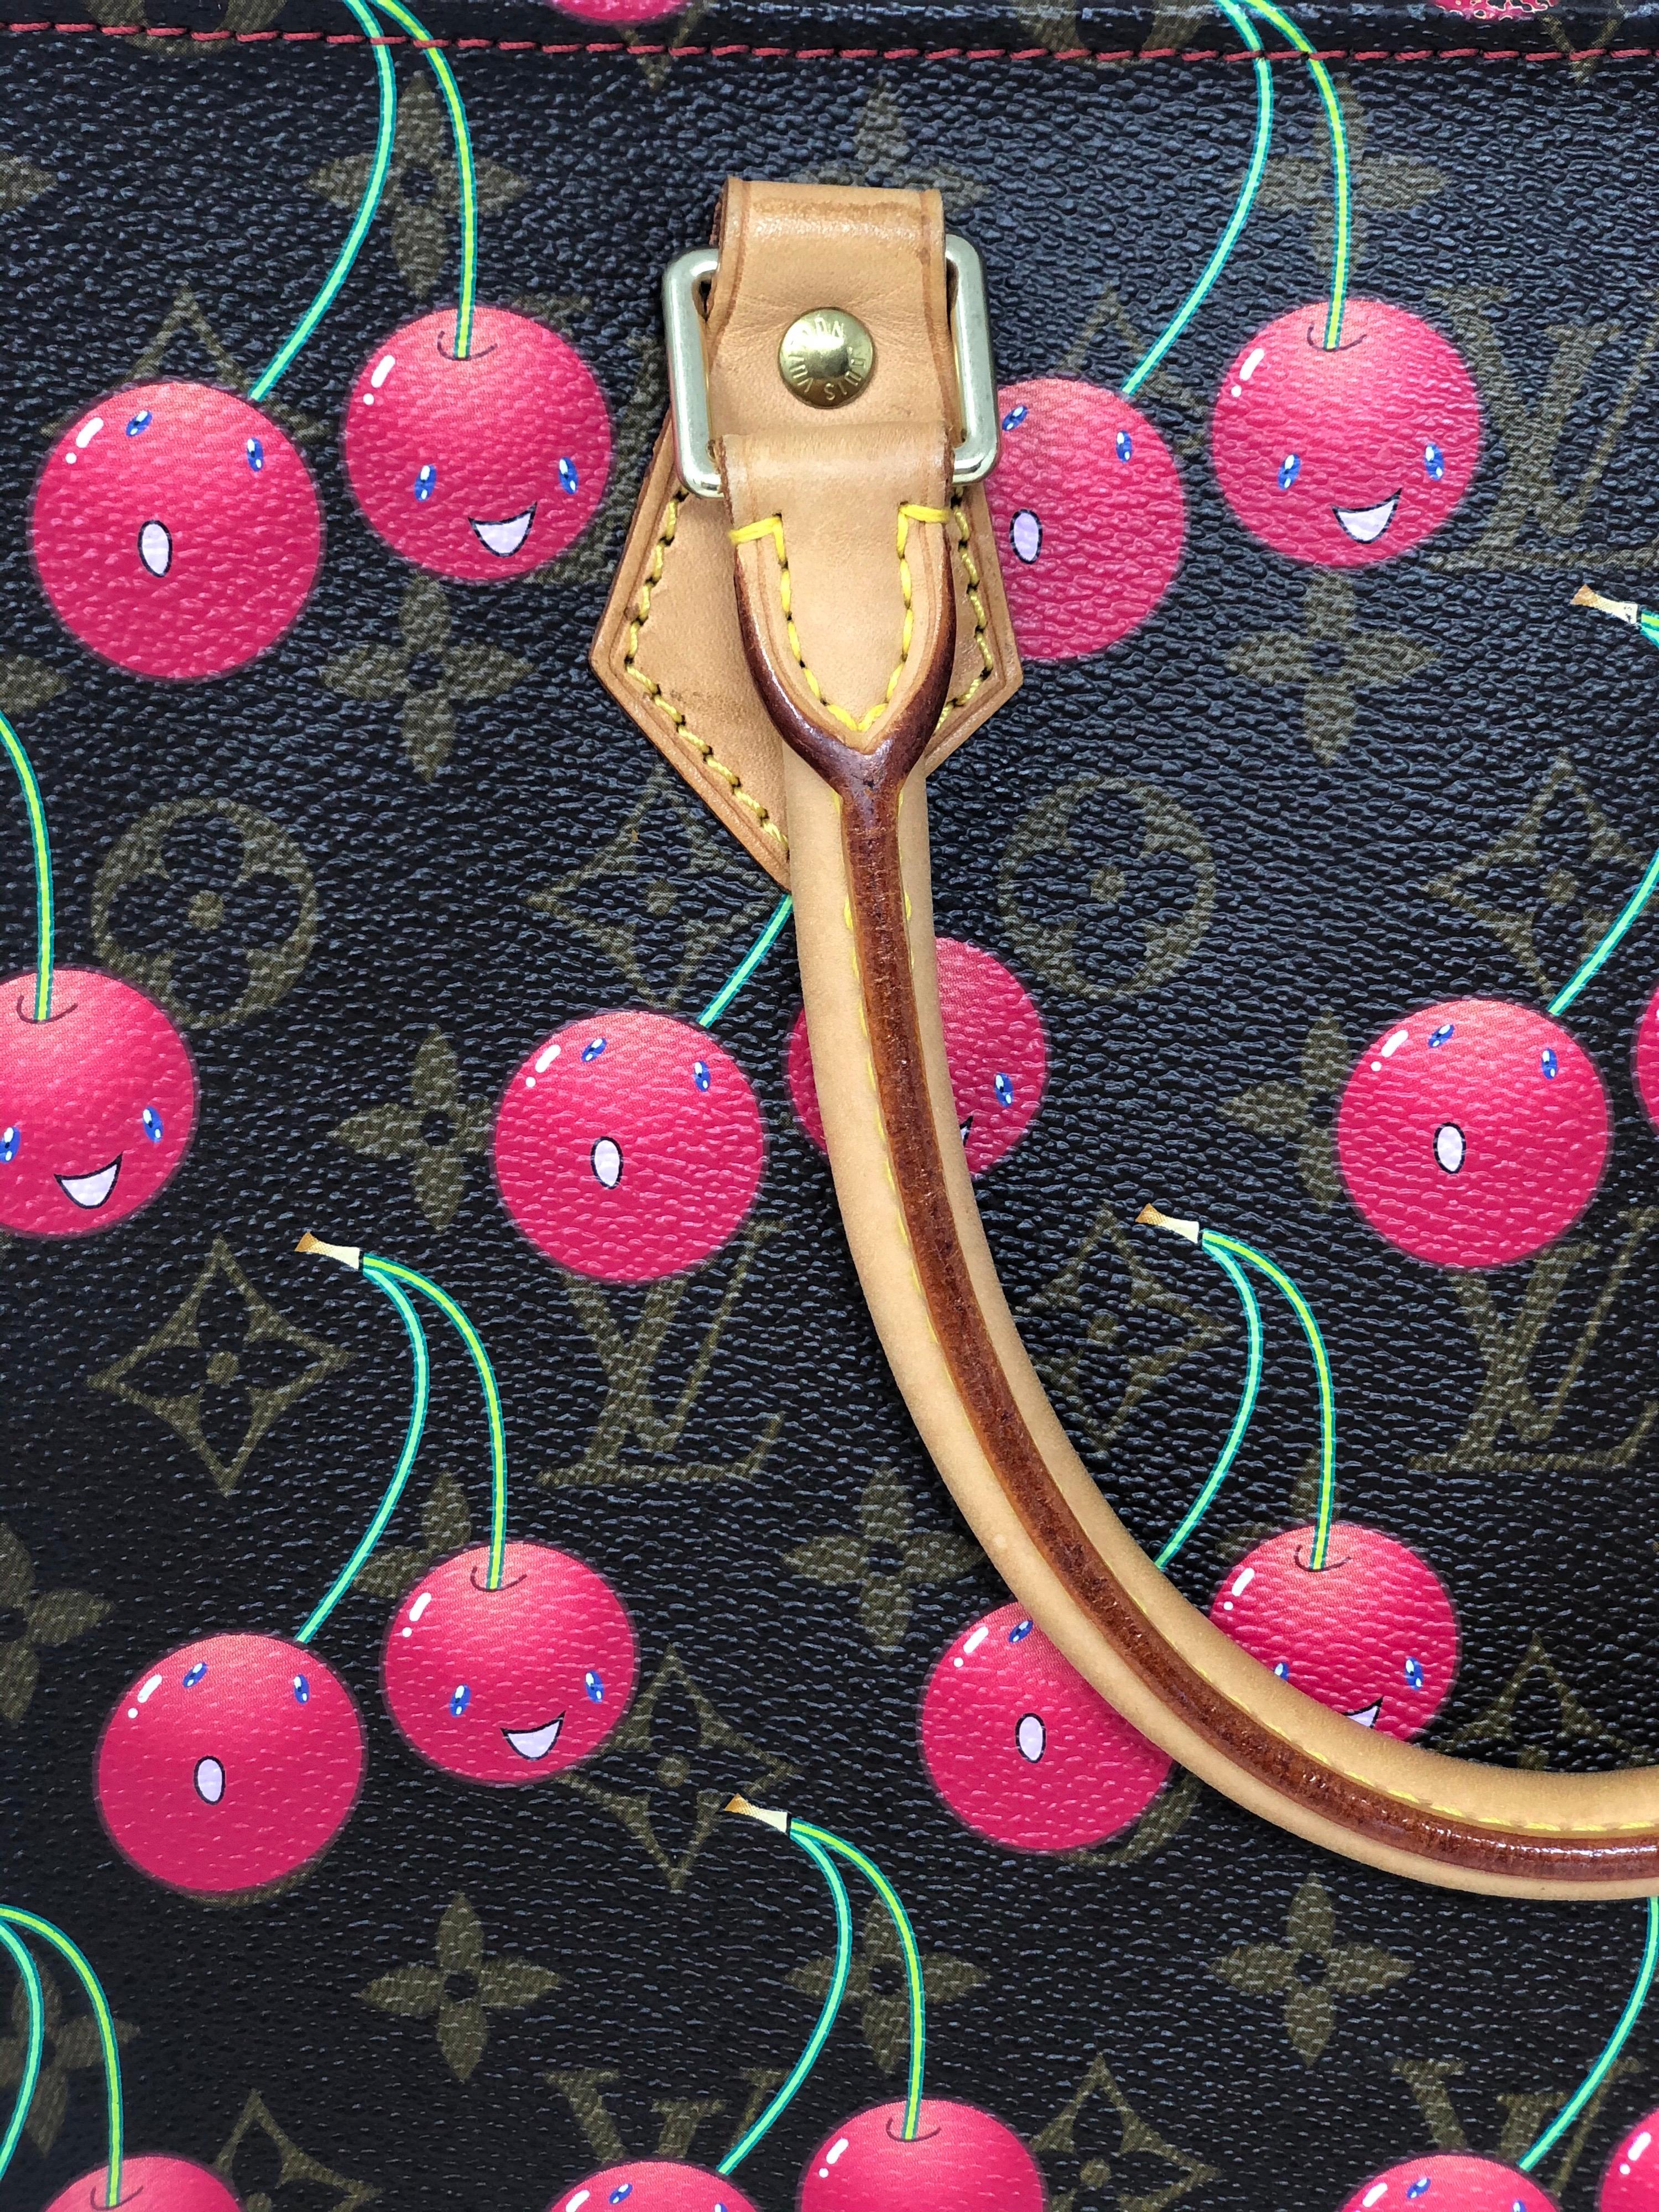 Louis Vuitton Sac Plat Cherry Tote Bag. Murakami design Cherry. Limited and rare collector's piece. Excellent condition. Guaranteed authentic. 